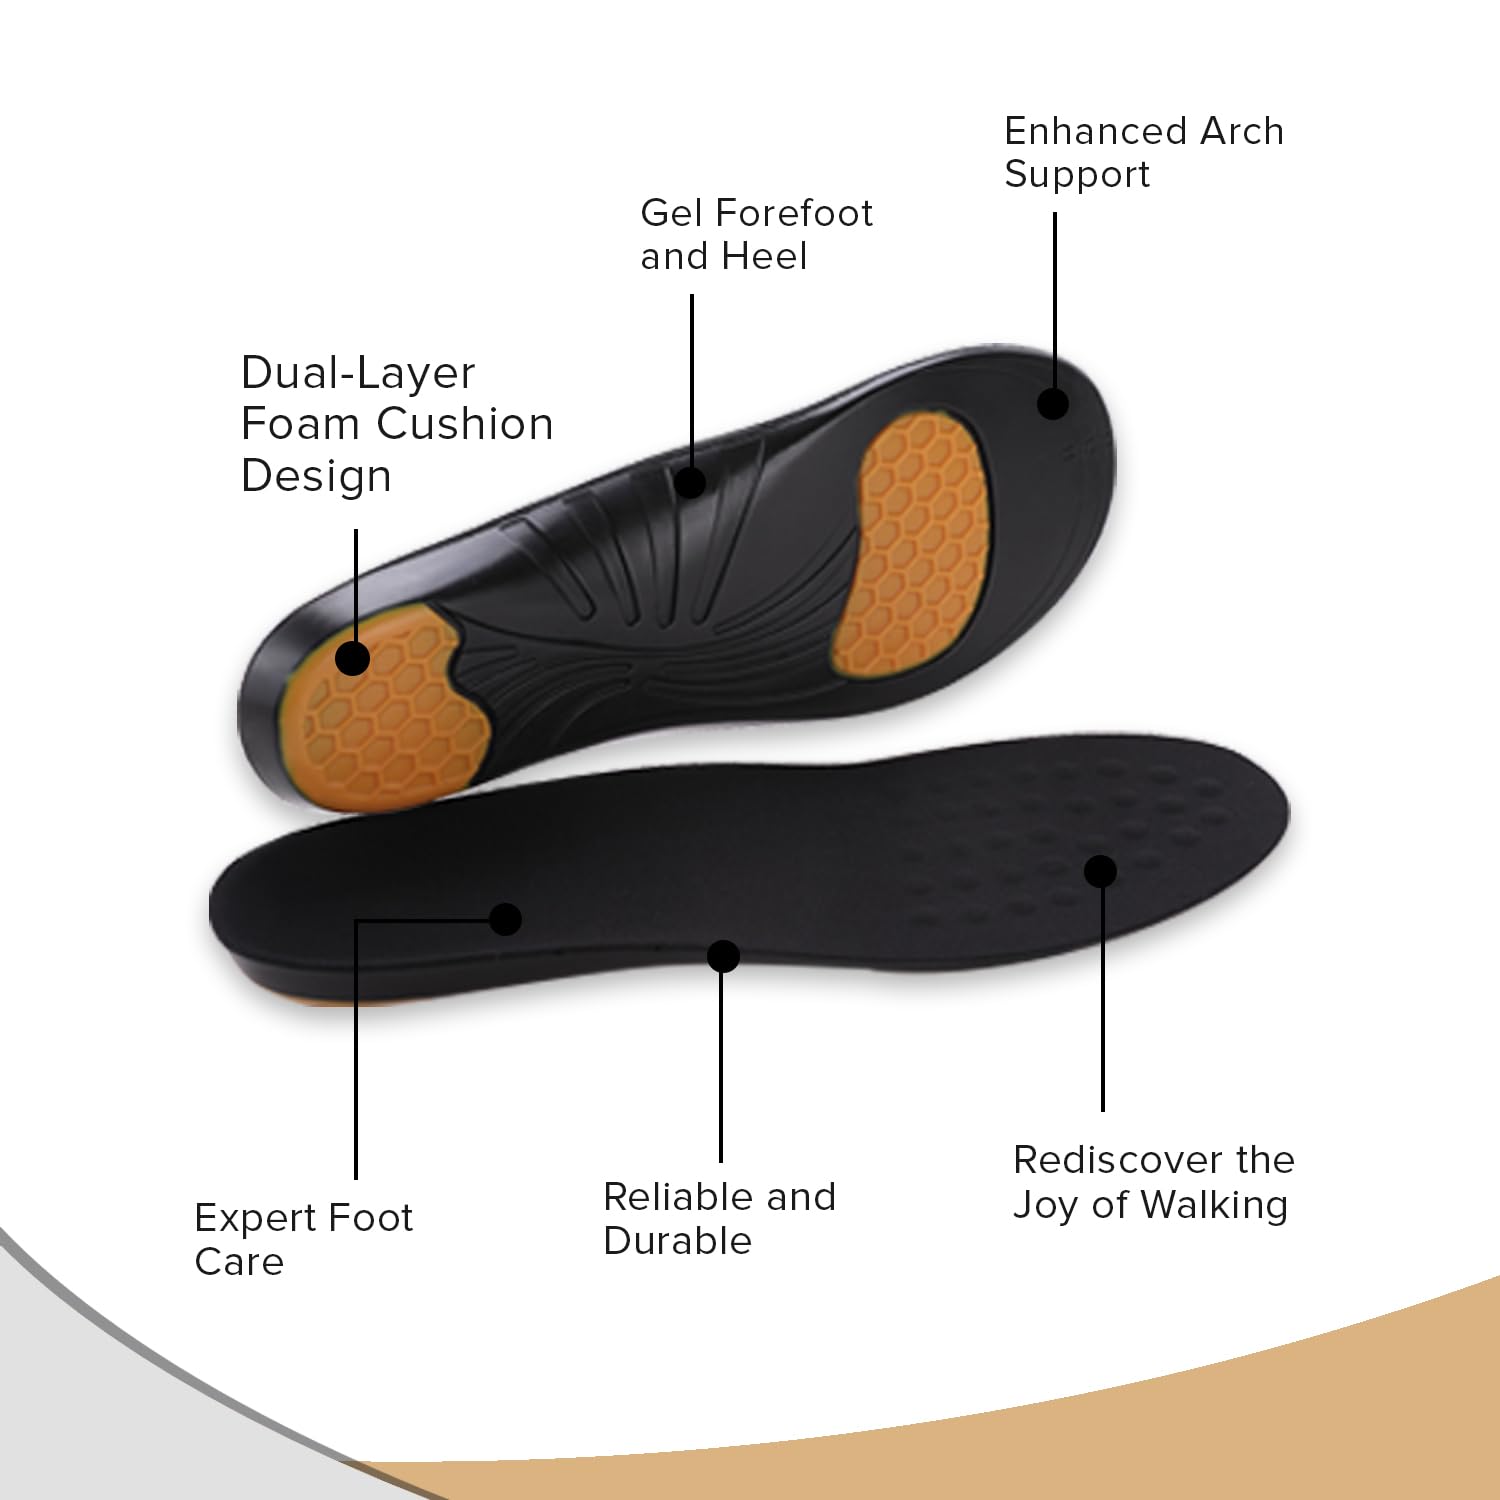 Dr Foot Stabilizing Support Insoles | Breathable Fabric for Dry Feet | Dual-Layer Foam Cushion Design | Maximum Comfort | Gel Forefoot | Heel for Impact Protection | - 1 Pair - (Large Size)